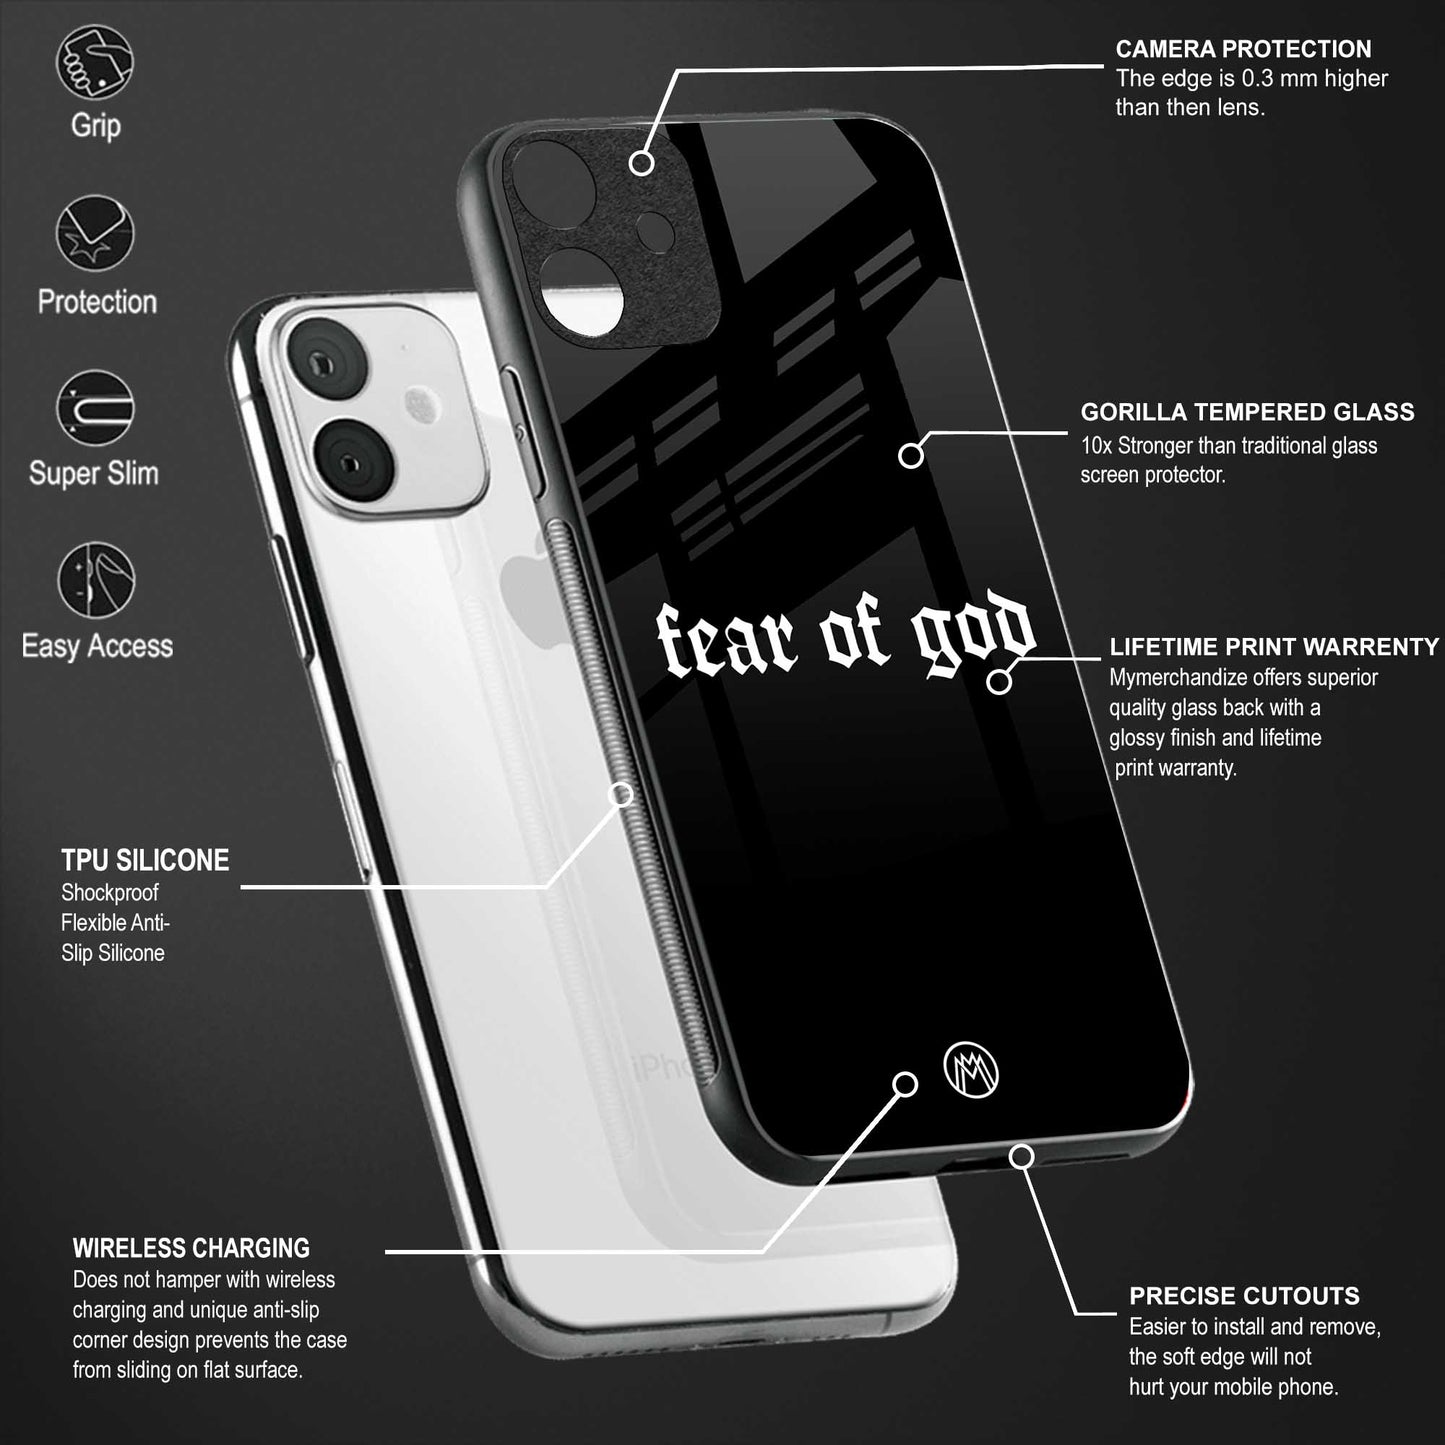 fear of god phone cover for samsung galaxy a20s